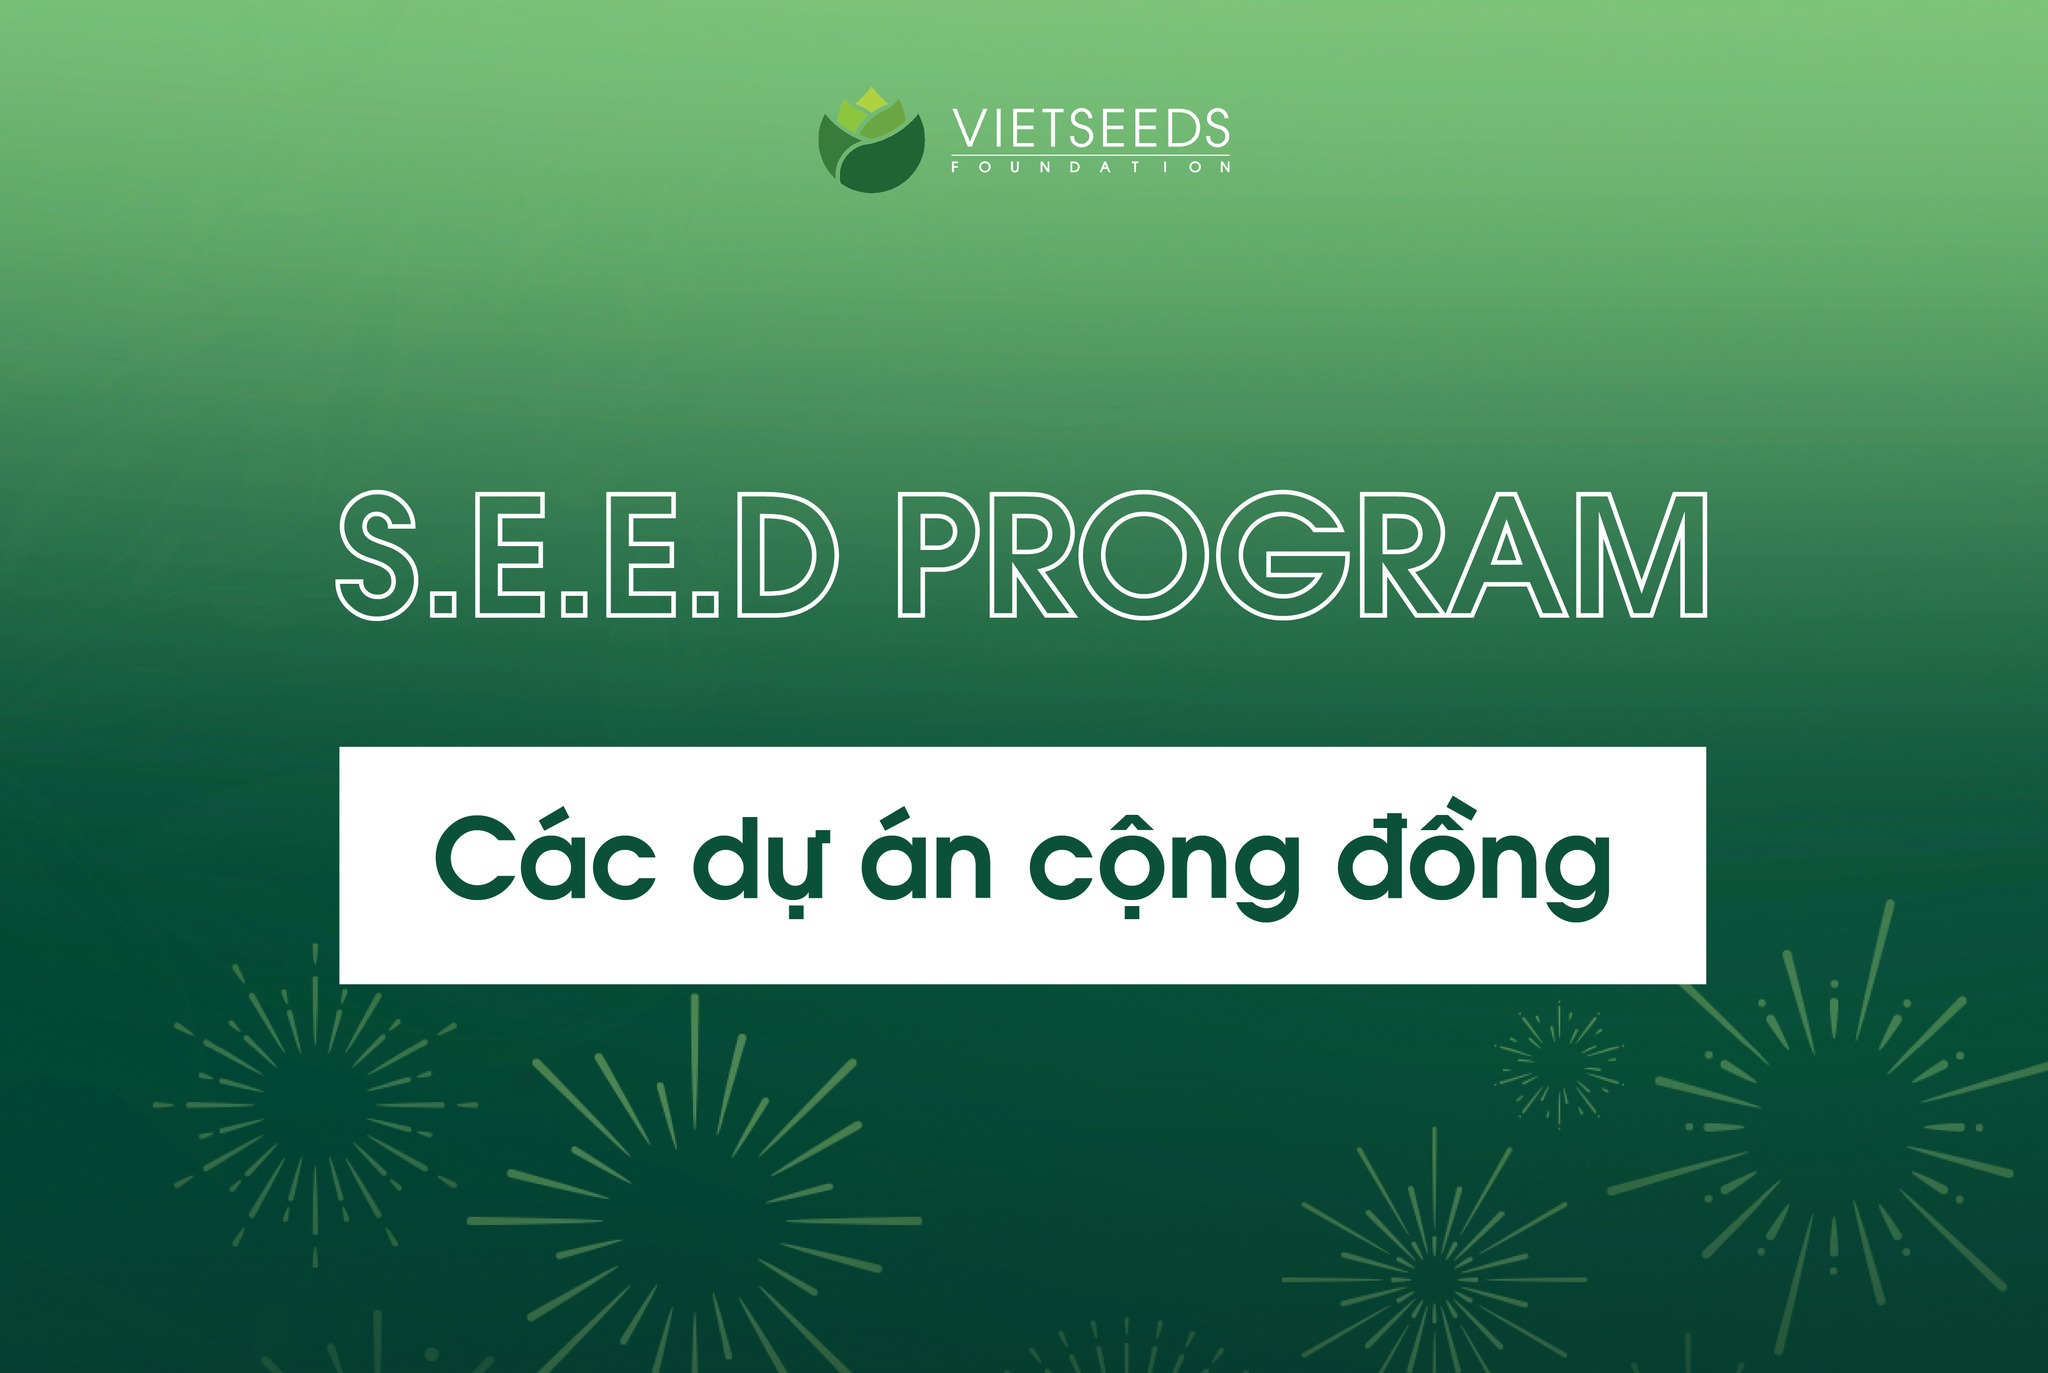 SPREADING KINDNESS WITH THE COMMUNITY PROJECT OF VIETSEEDS STUDENTS